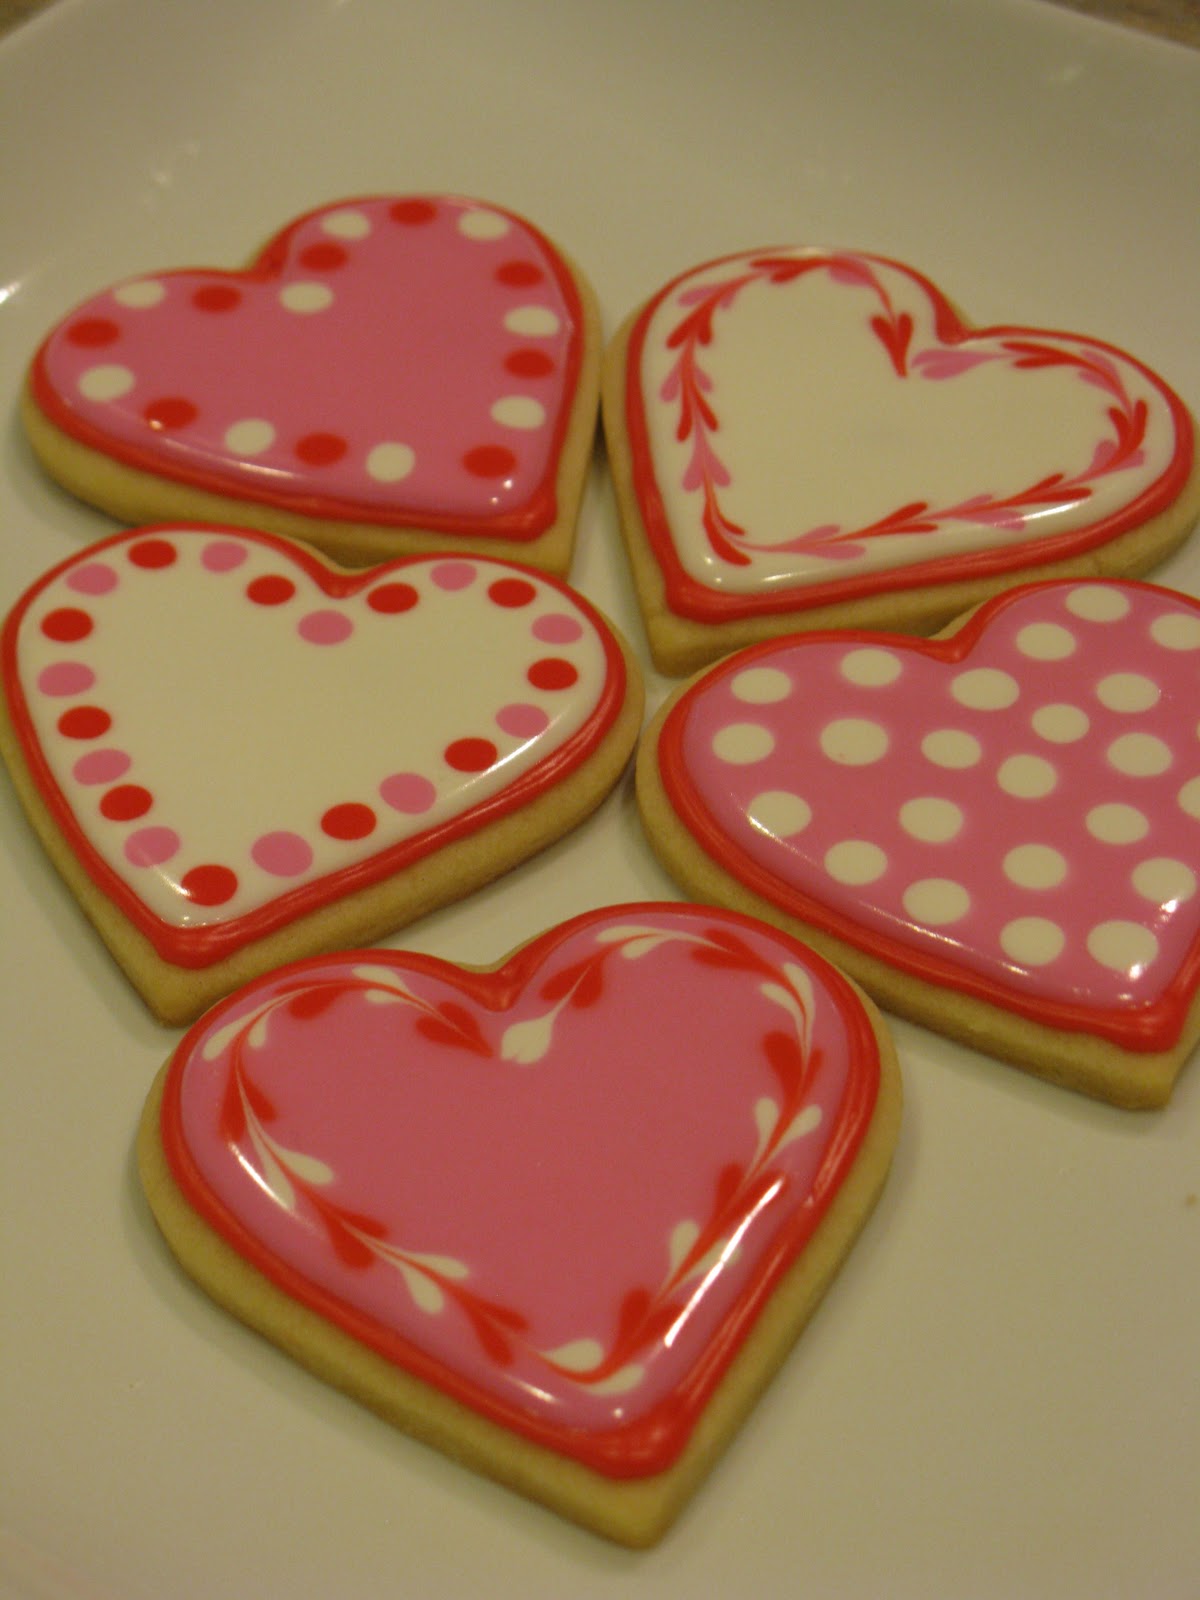 A Counselor's Confections: Valentine's Day Cookies